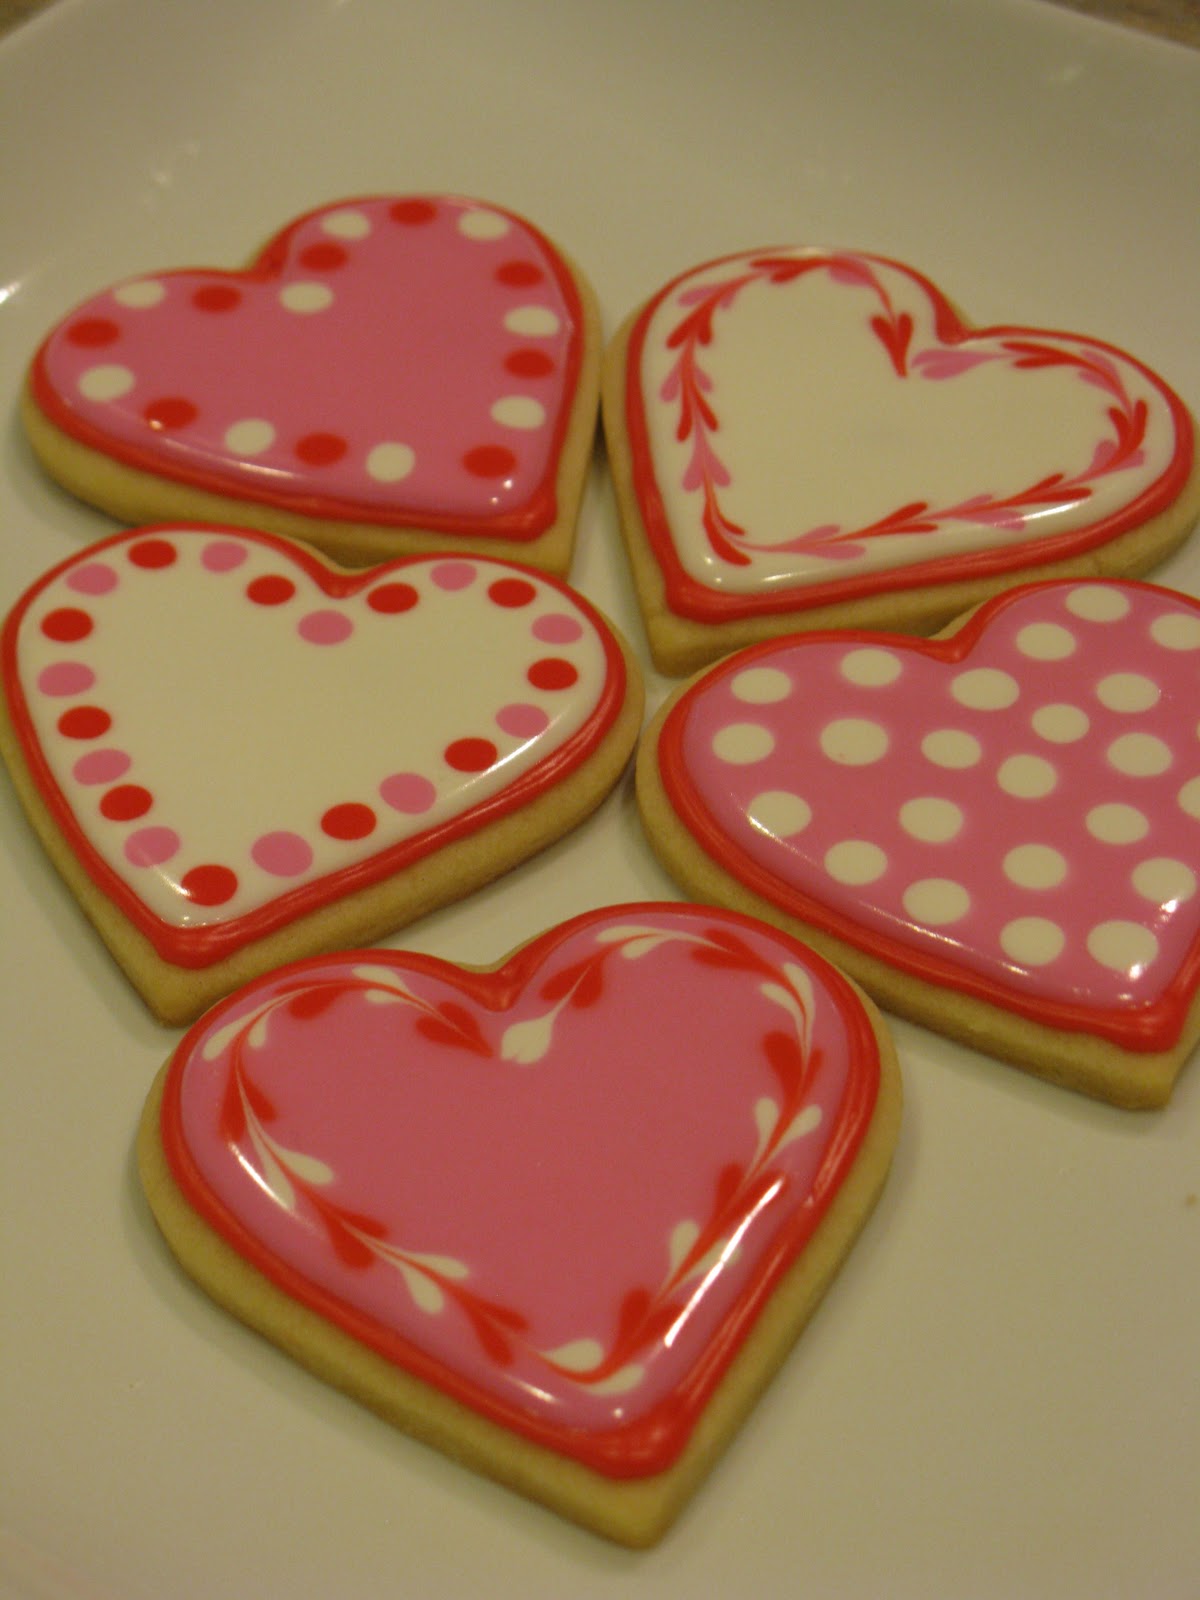 A Counselor's Confections: Valentine's Day Cookies